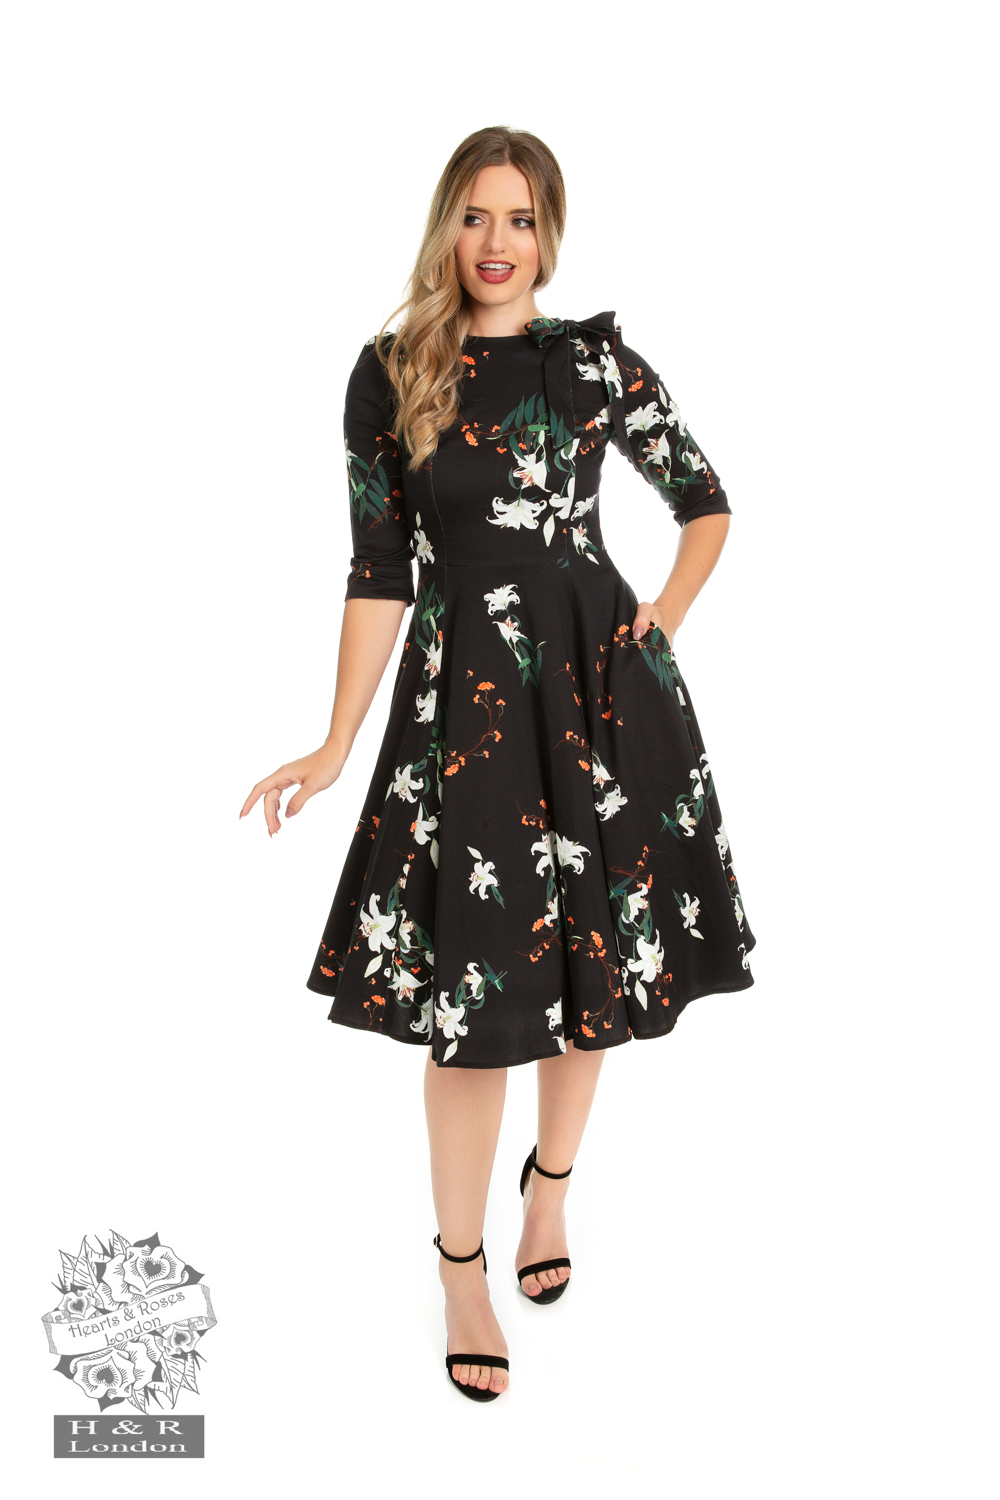 Diana Lilly Floral Swing Dress